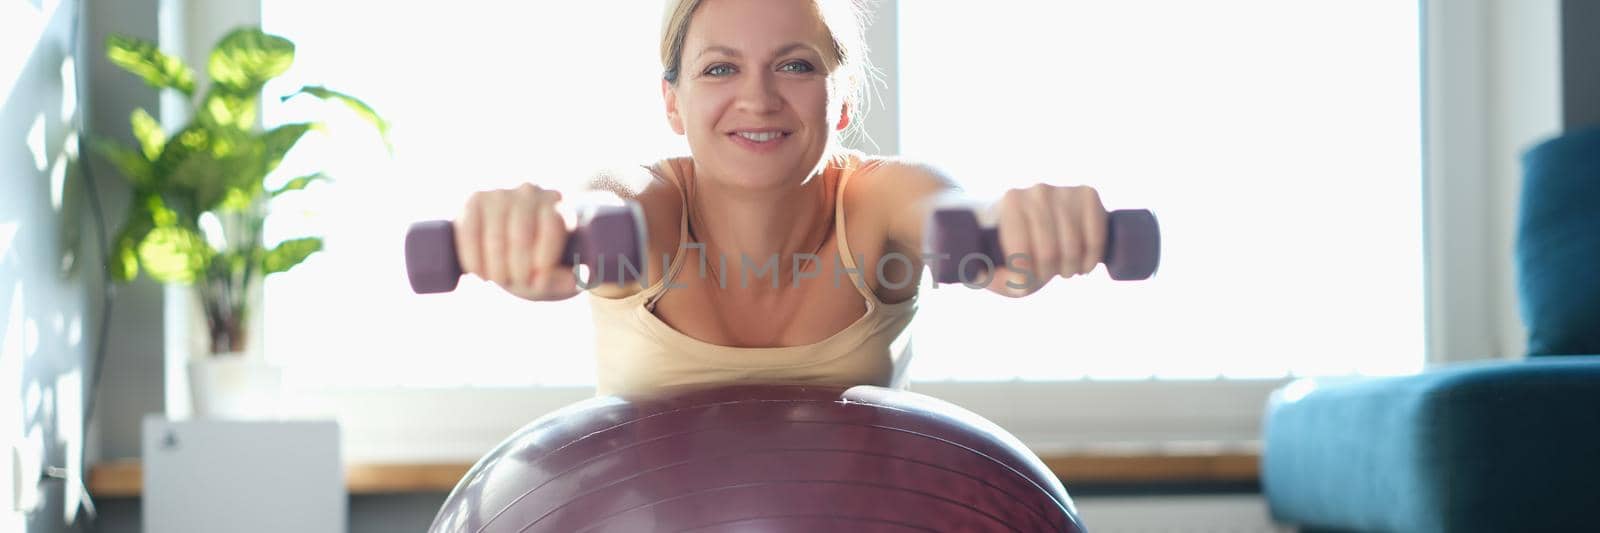 Woman doing exercises with dumbbells on a sports ball by kuprevich